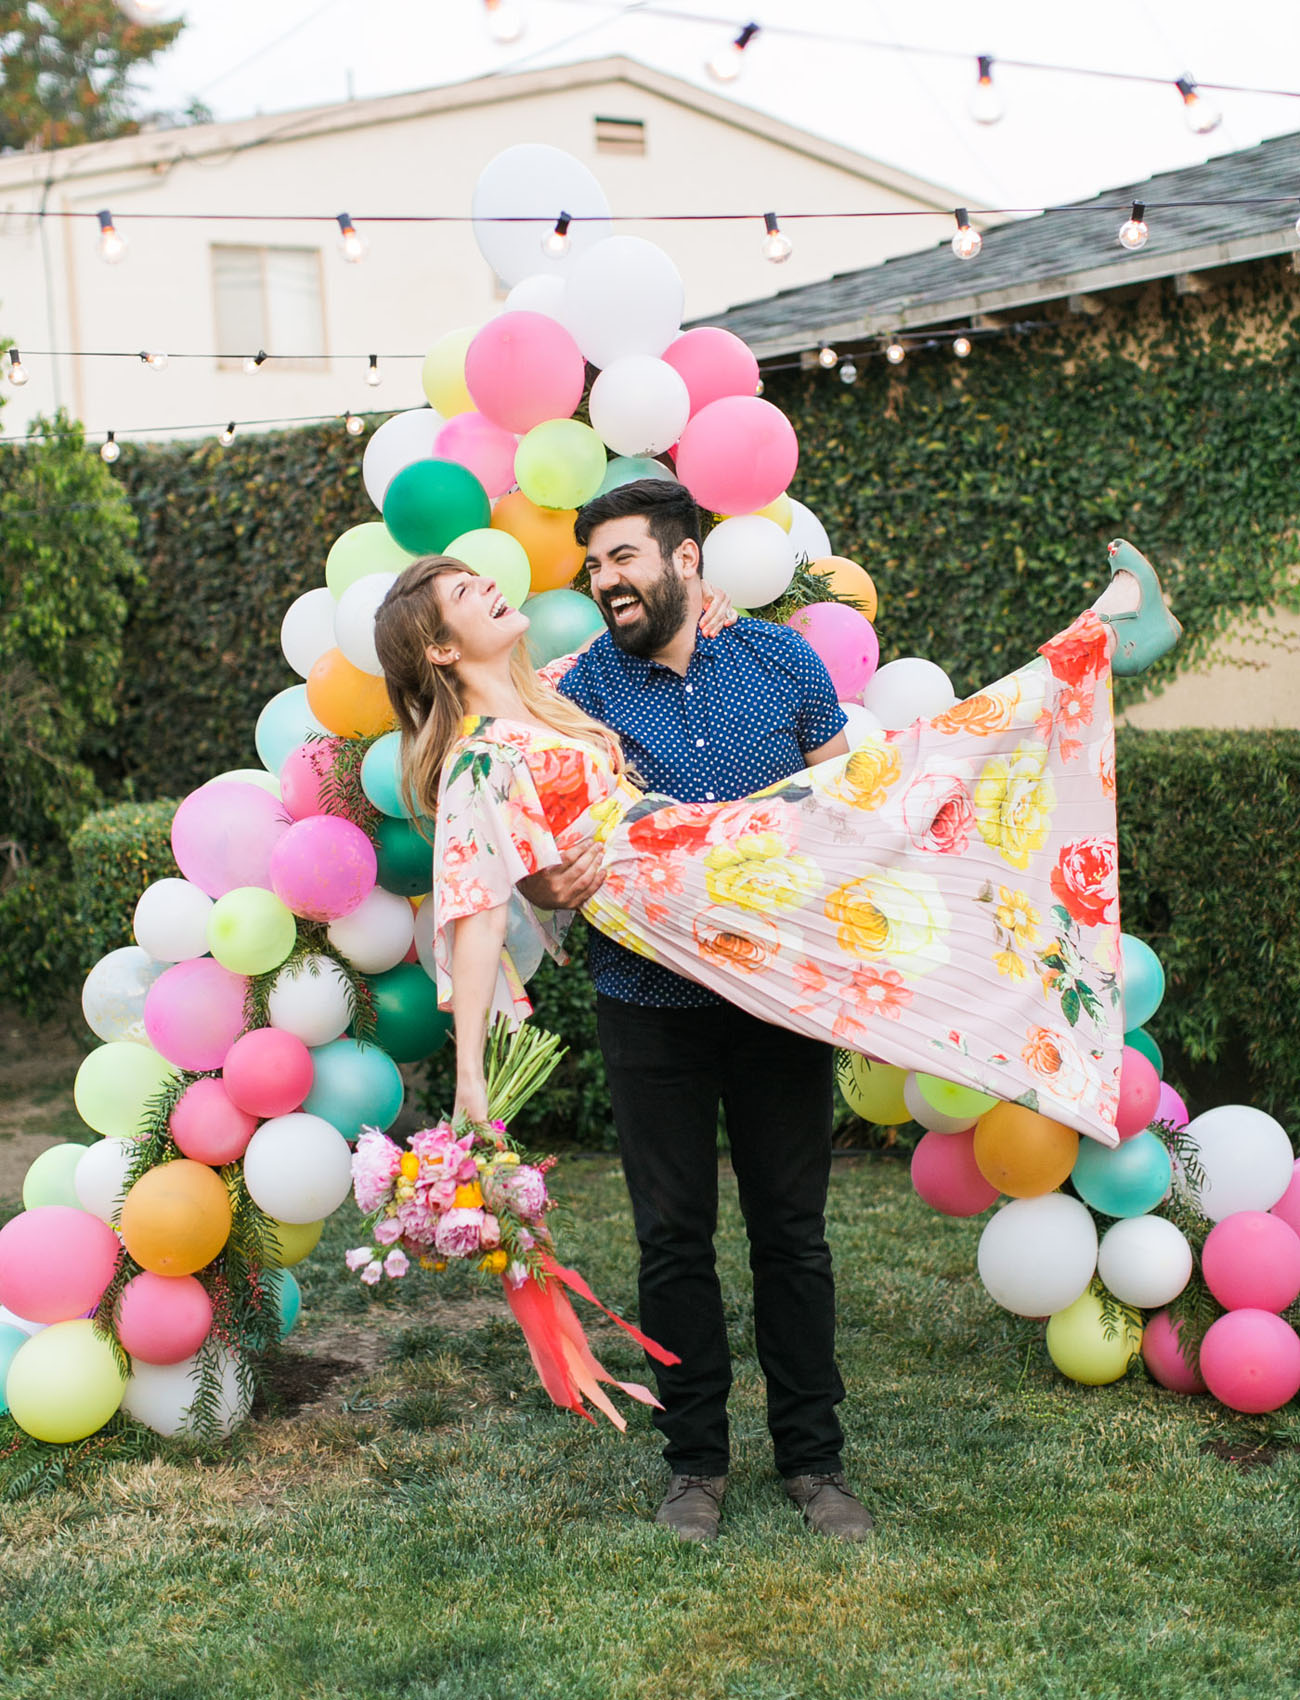 A Colorful Whimsical Wedding Proposal